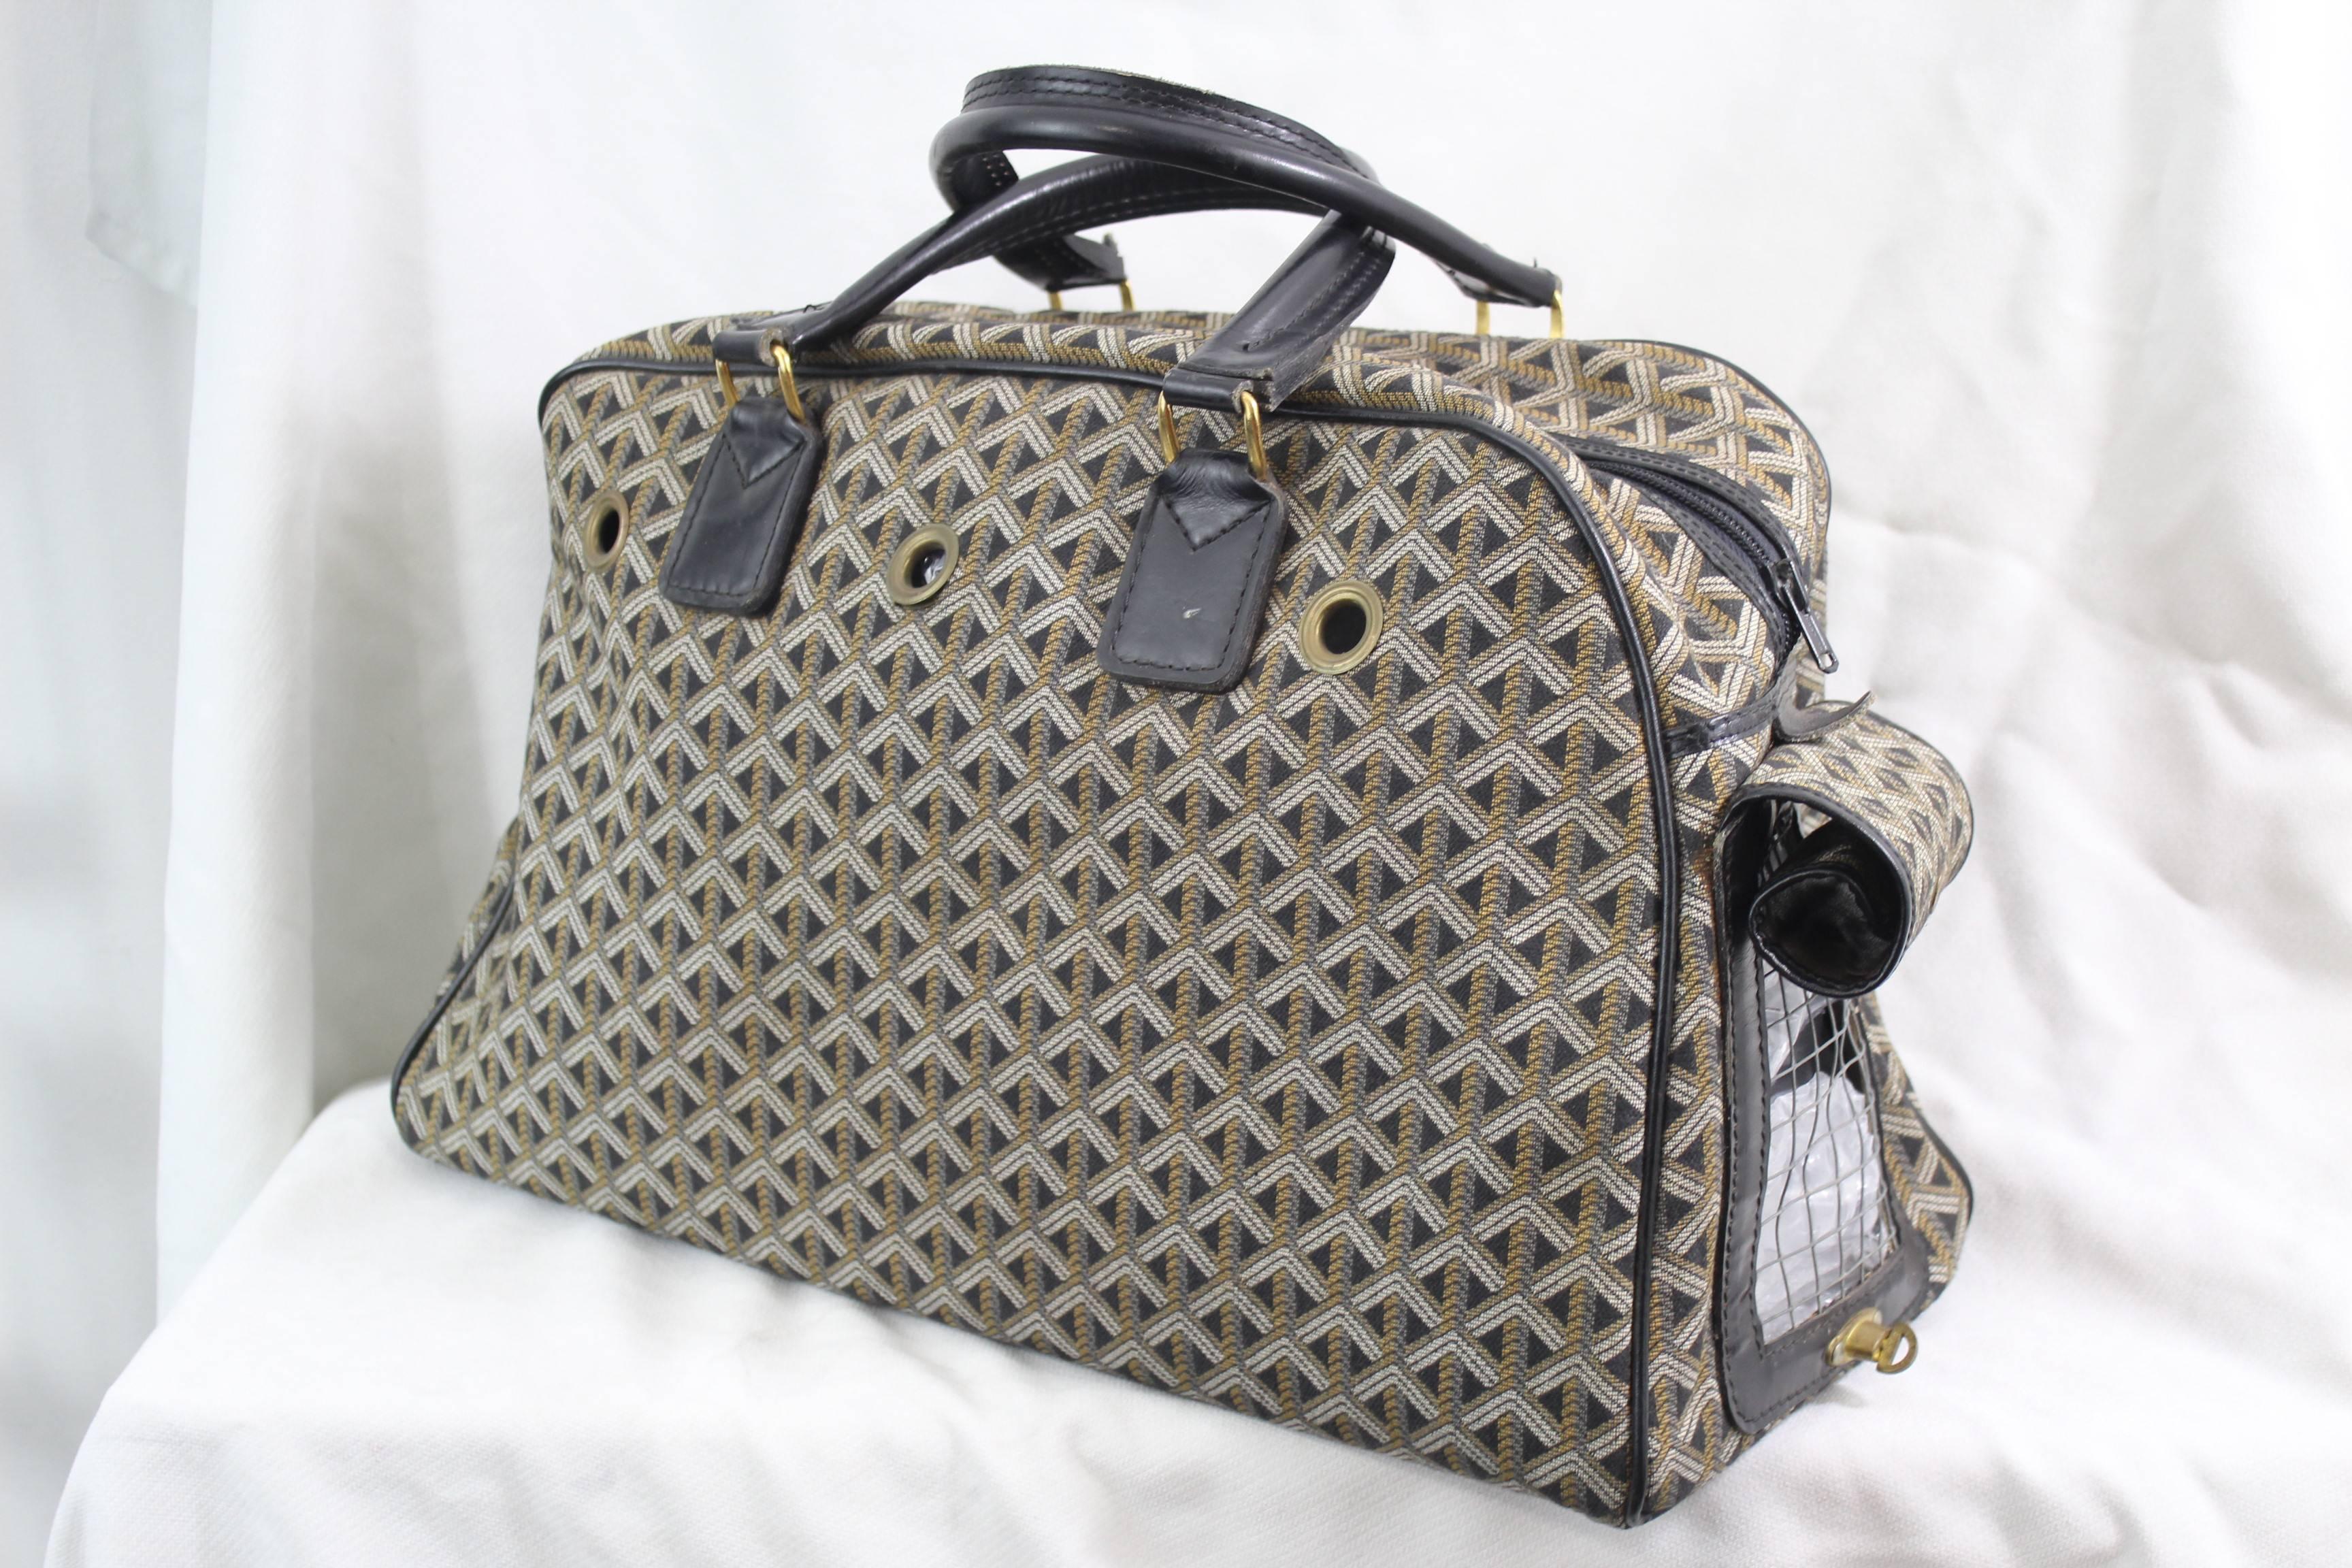 Vintage colelctor Goyard pet Carrie rin monogram canvas.

Bag fom the 70's, ggood vintage condition but signs of wear and feeling of vintage in canvas and leather. Some smell

44x26 cm

